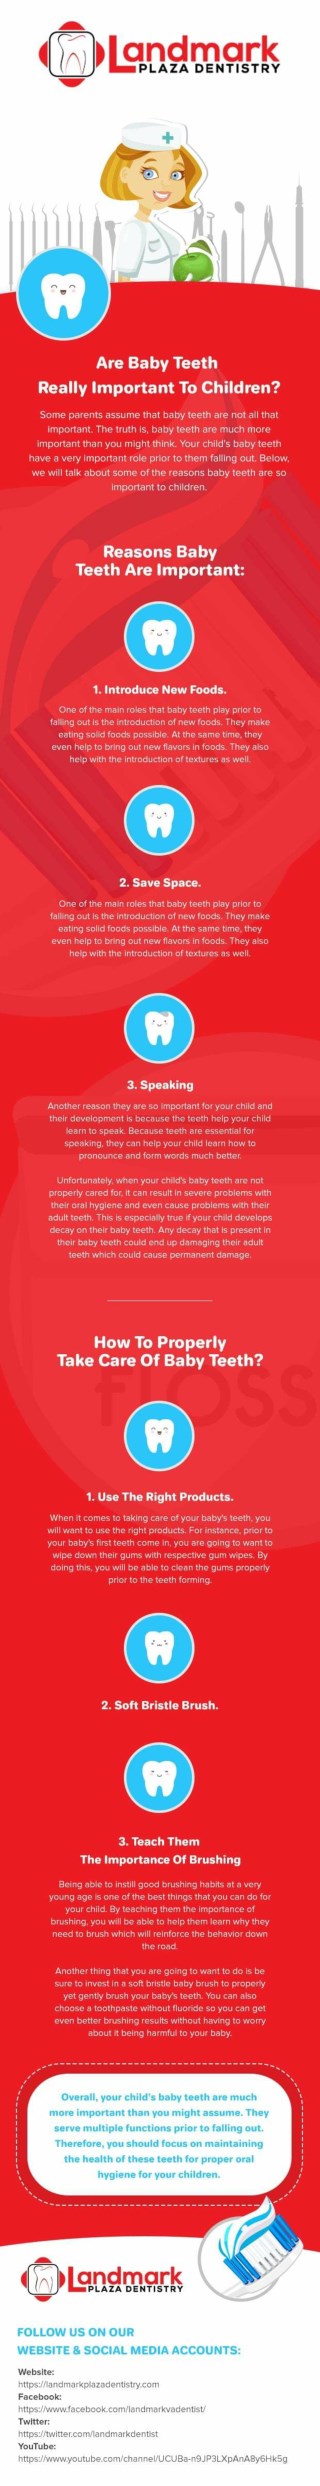 Are Baby Teeth Really Important to Children?